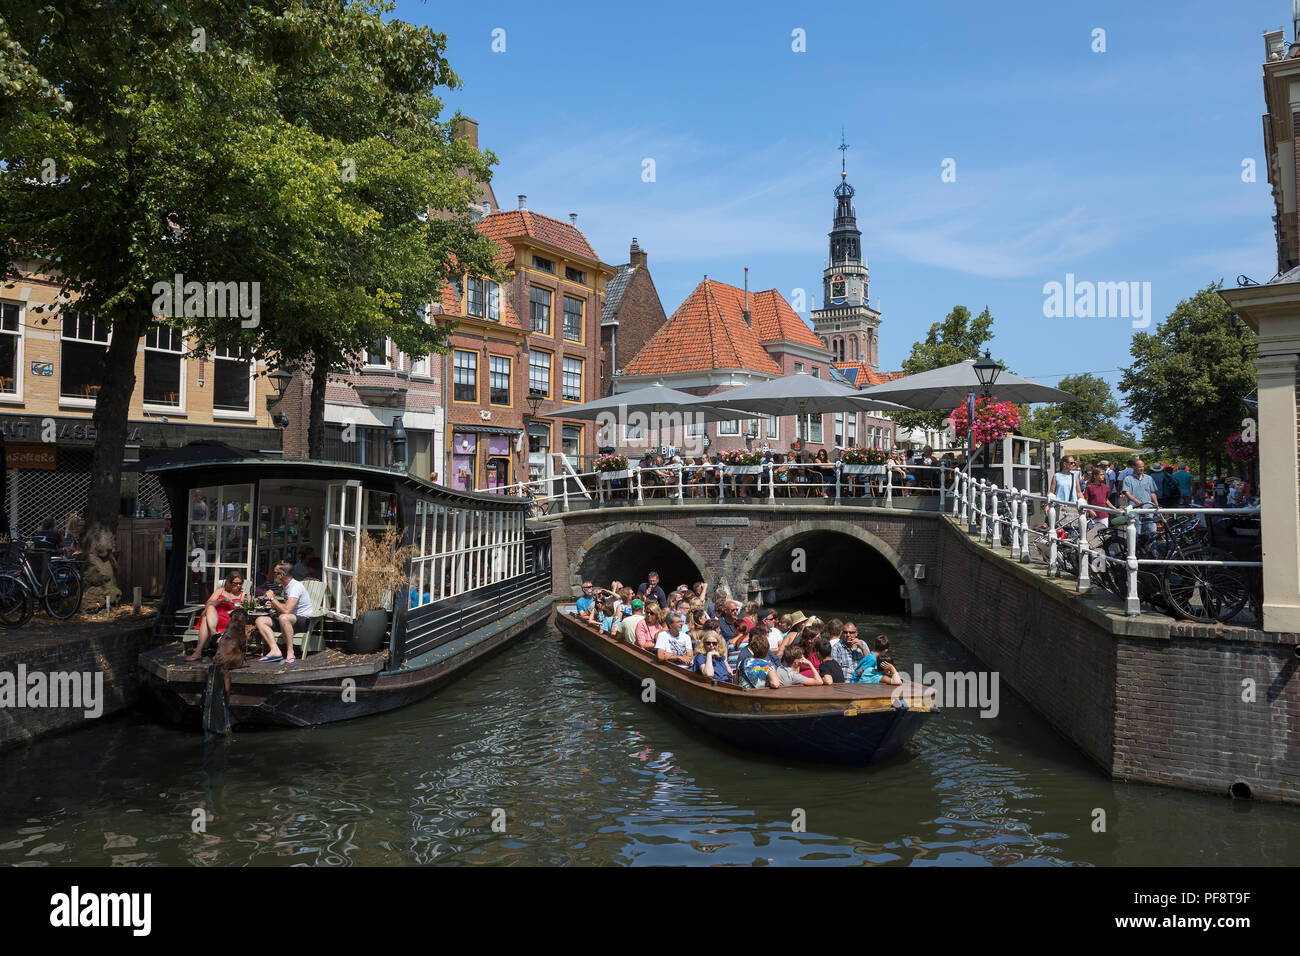 Alkmaar, Netherlands - July 20, 2018: Touristic sight seeing boat trip in the historical center of Alkmaar Stock Photo